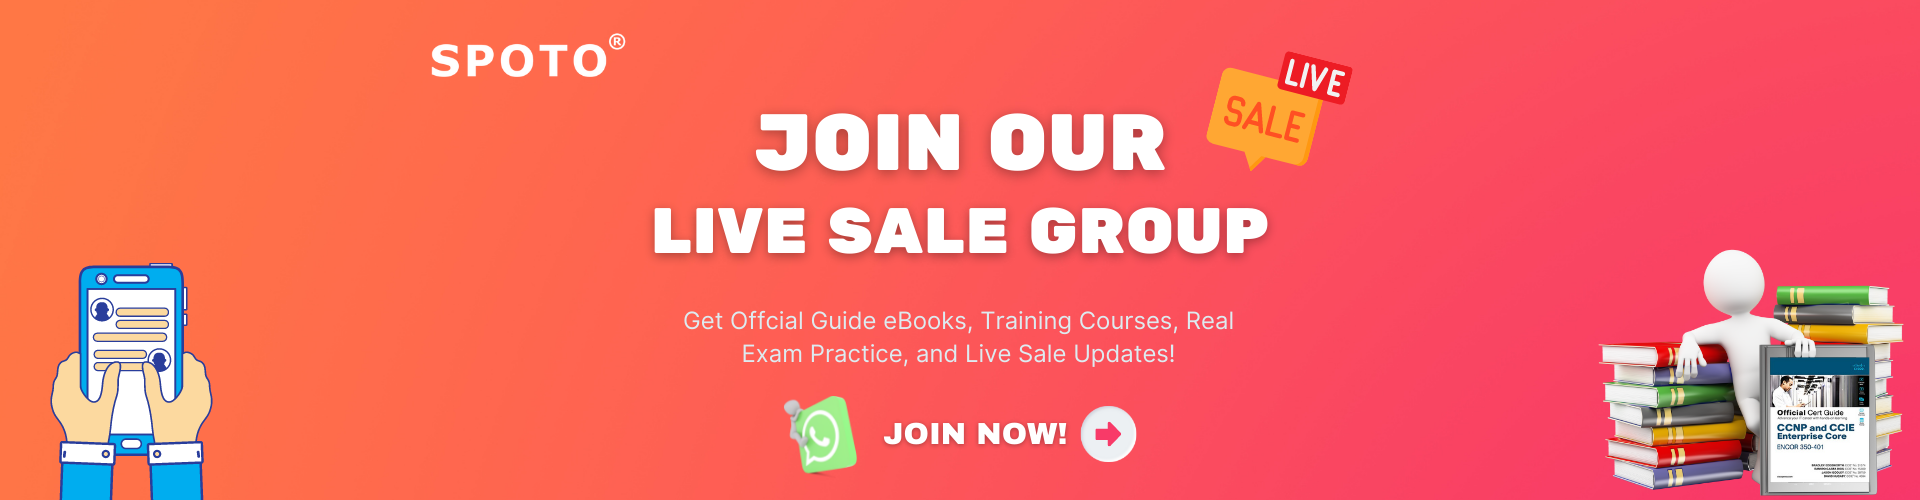 Join our live sale group